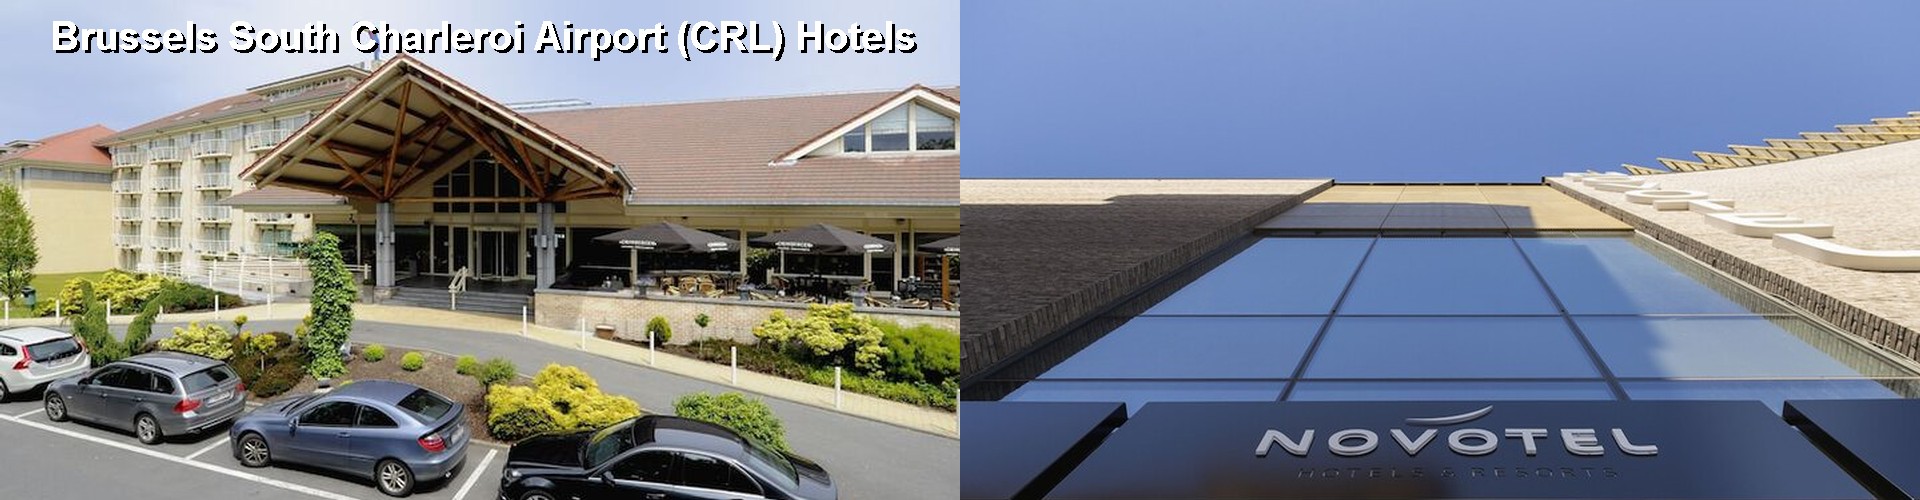 5 Best Hotels near Brussels South Charleroi Airport (CRL)